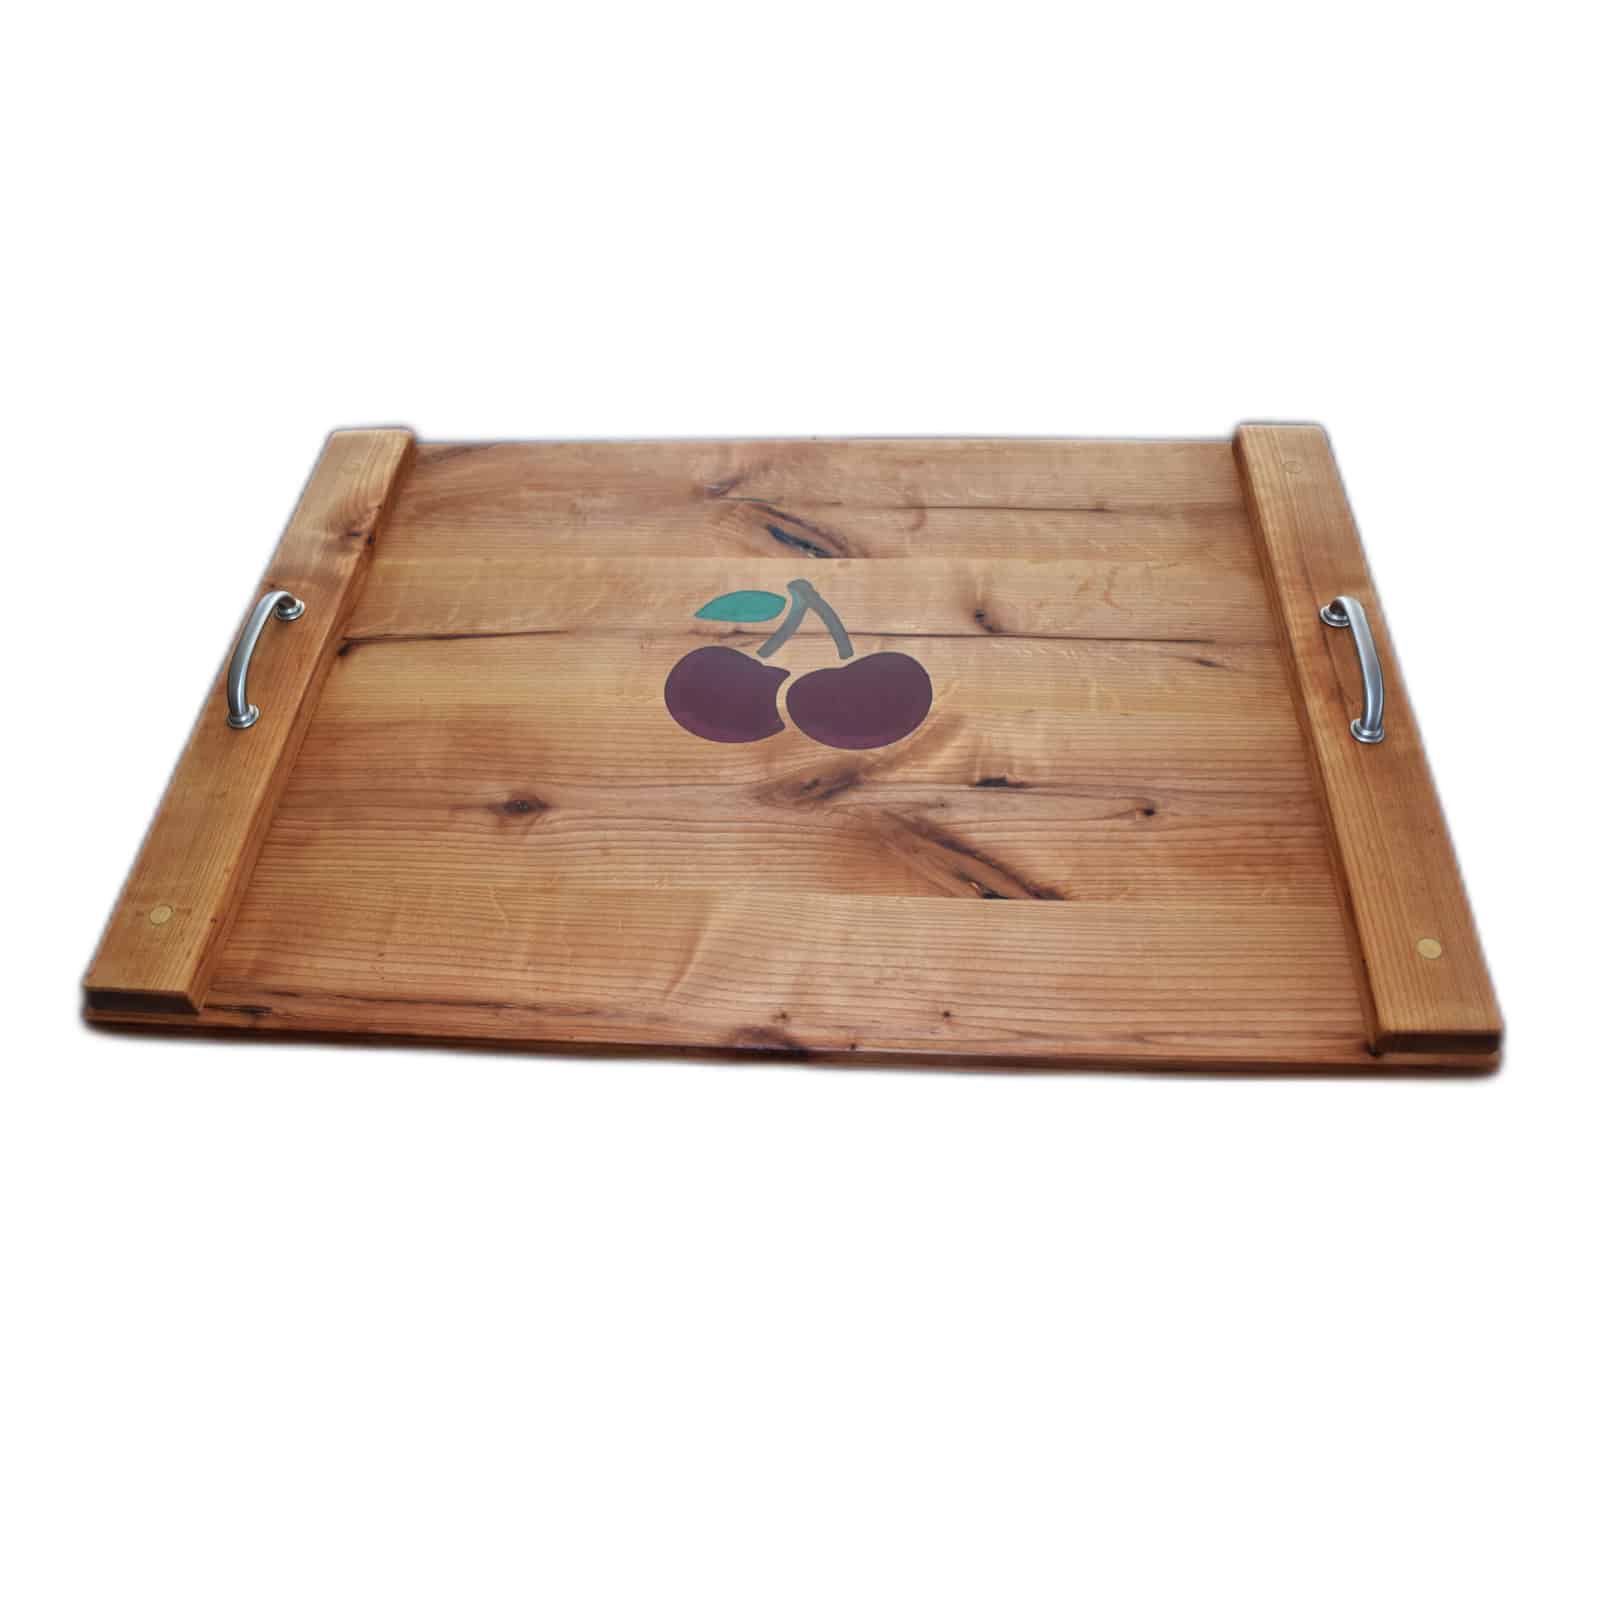 Hardwood Cherry Noodle Board Food Safe Stove Cover Customizable Engraved  Cutting Board No Stain All Natural Cherry 